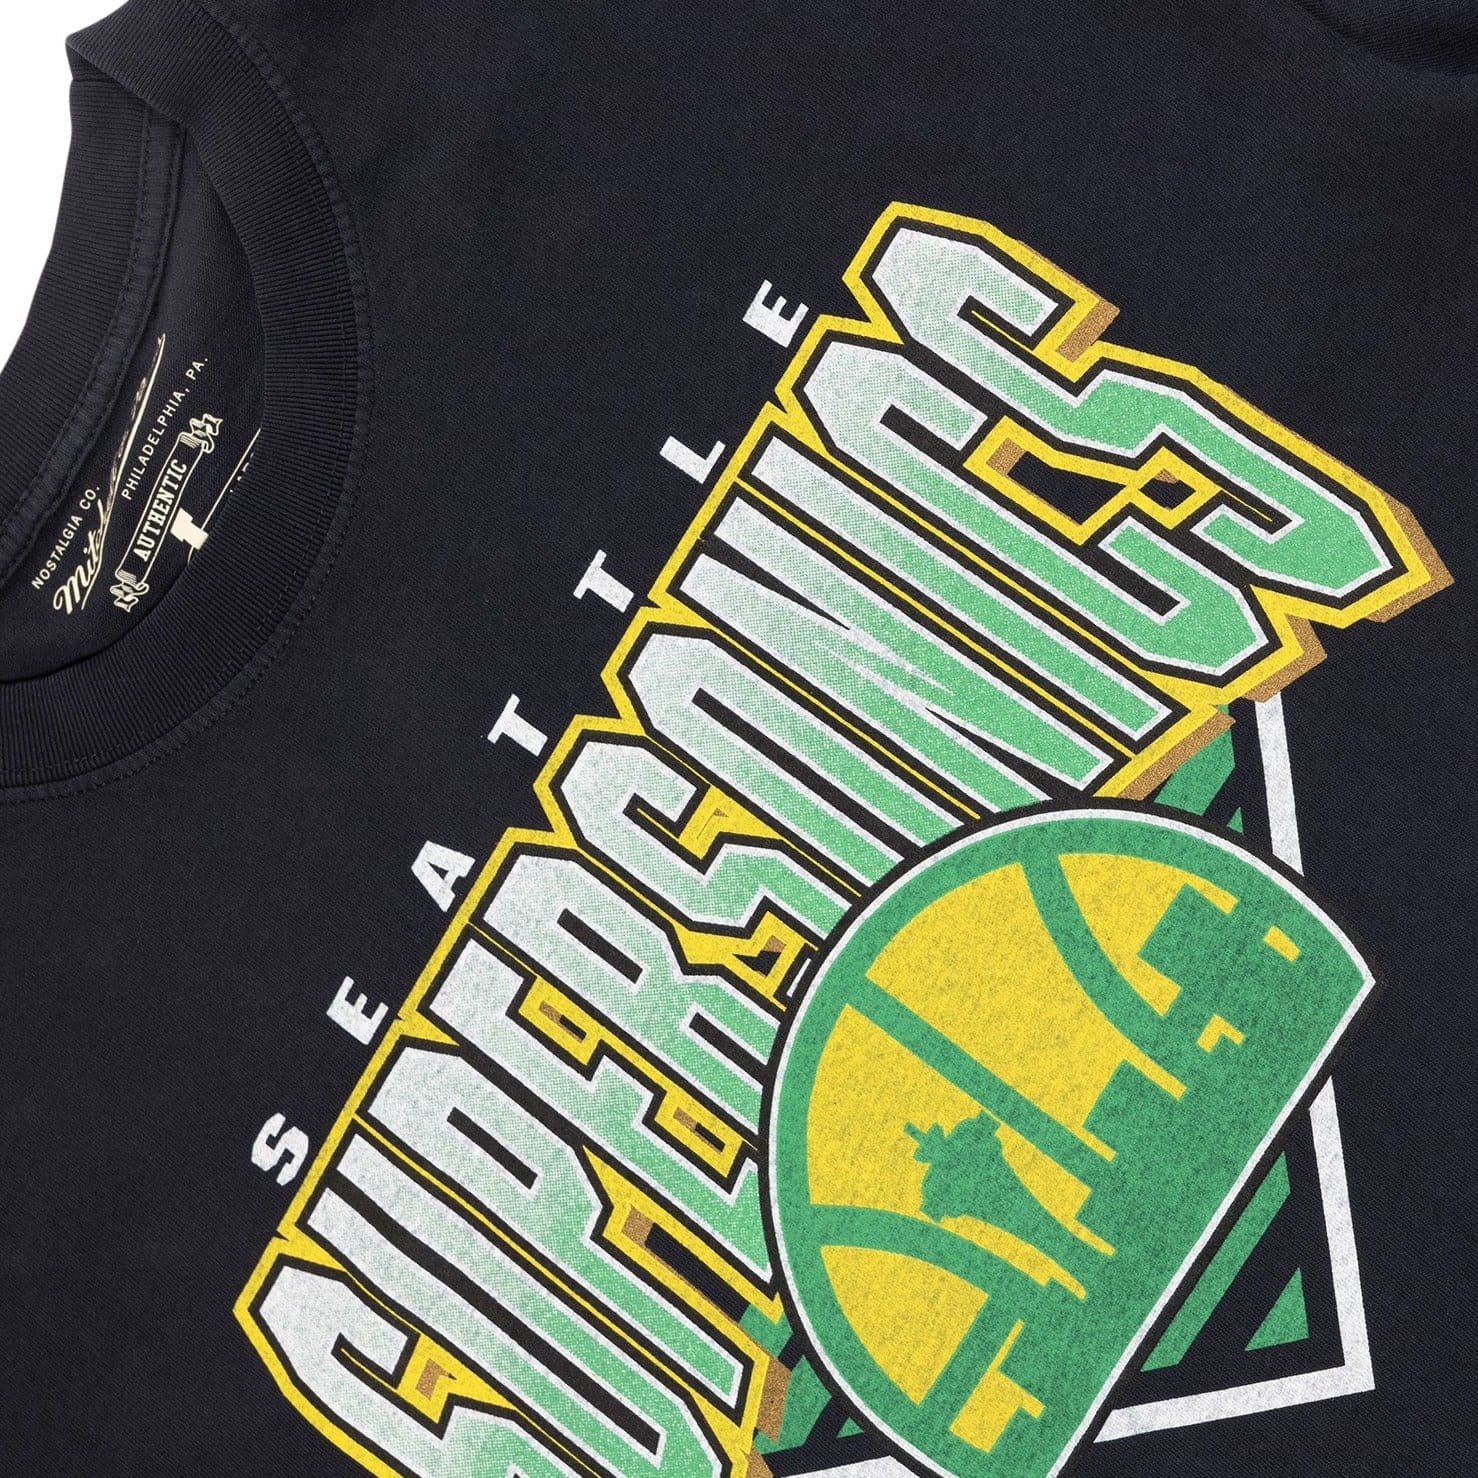 Mitchell & Ness Seattle Sonics Division Arch T-Shirt Faded Green